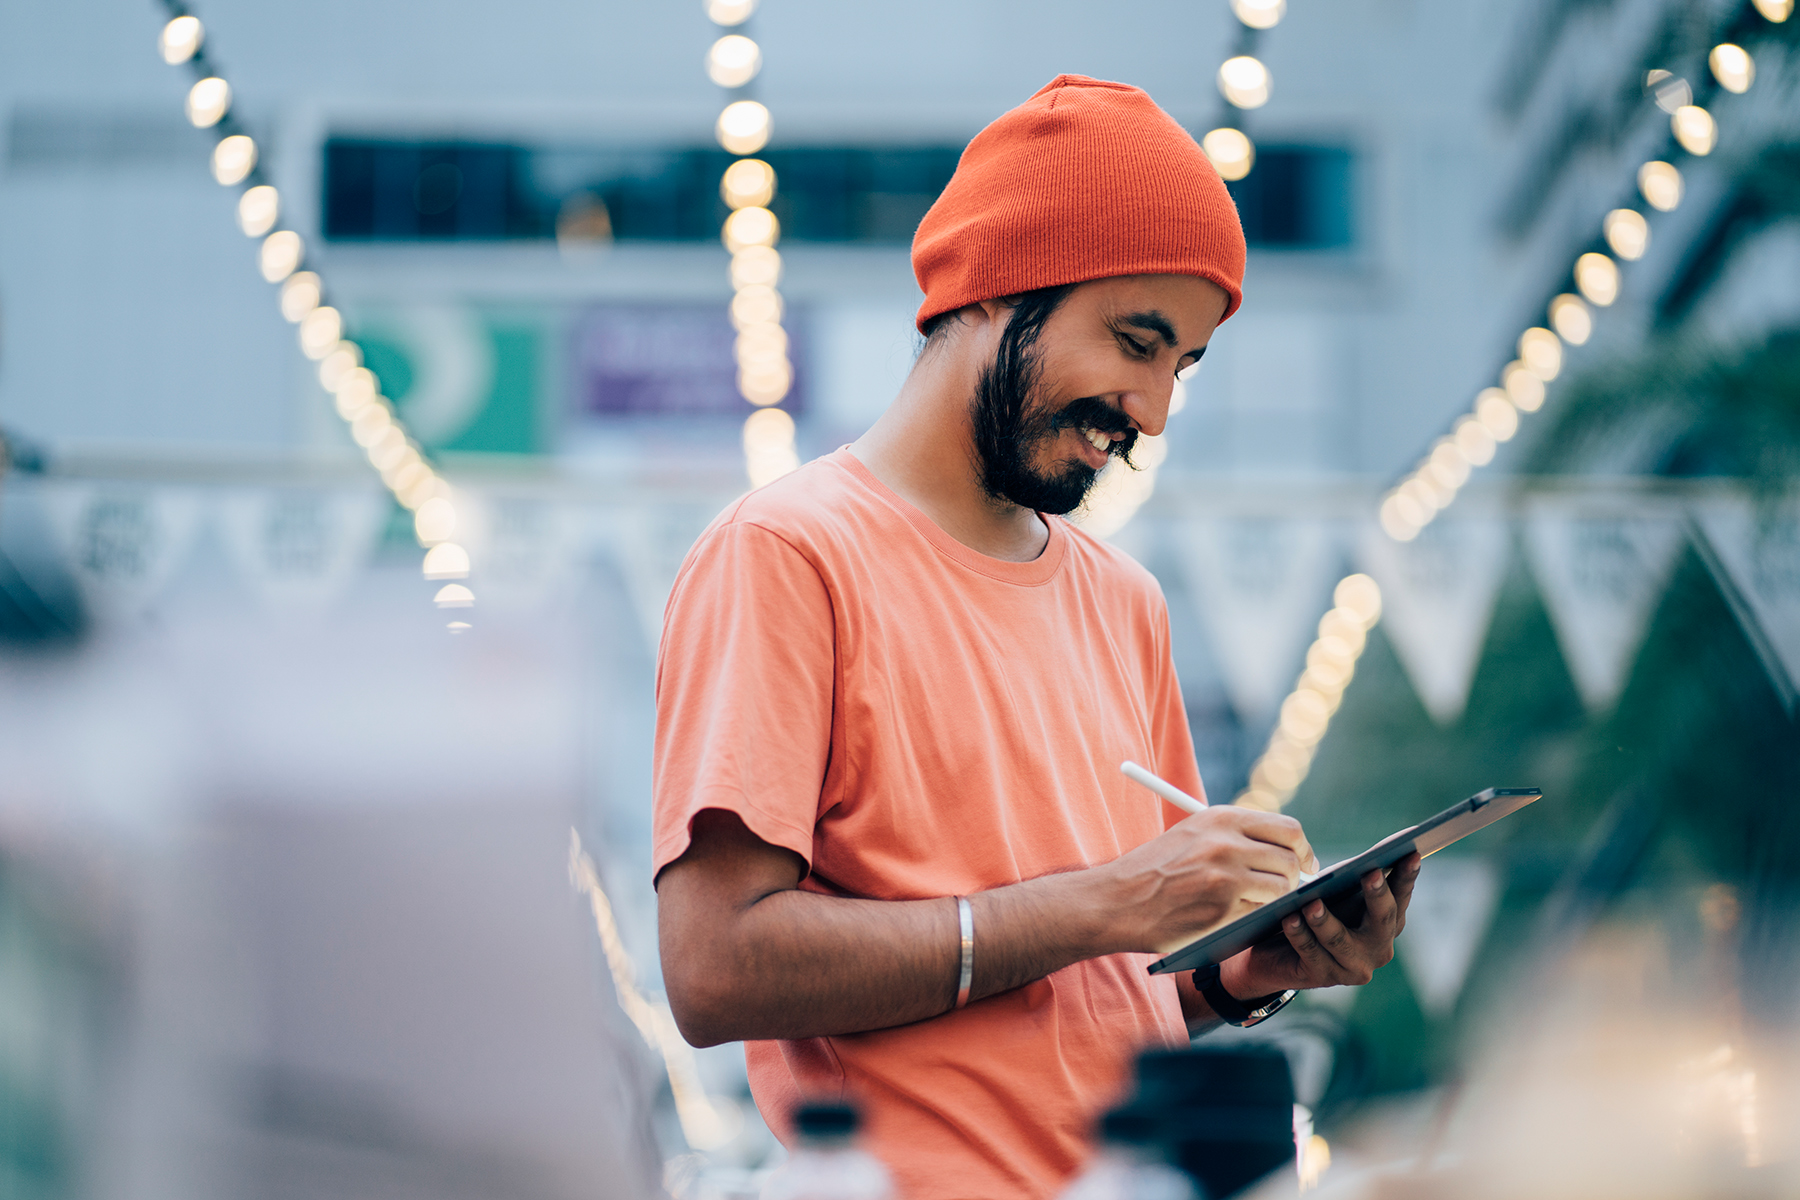 Happy man in orange hat and t-shirt working on a tablet